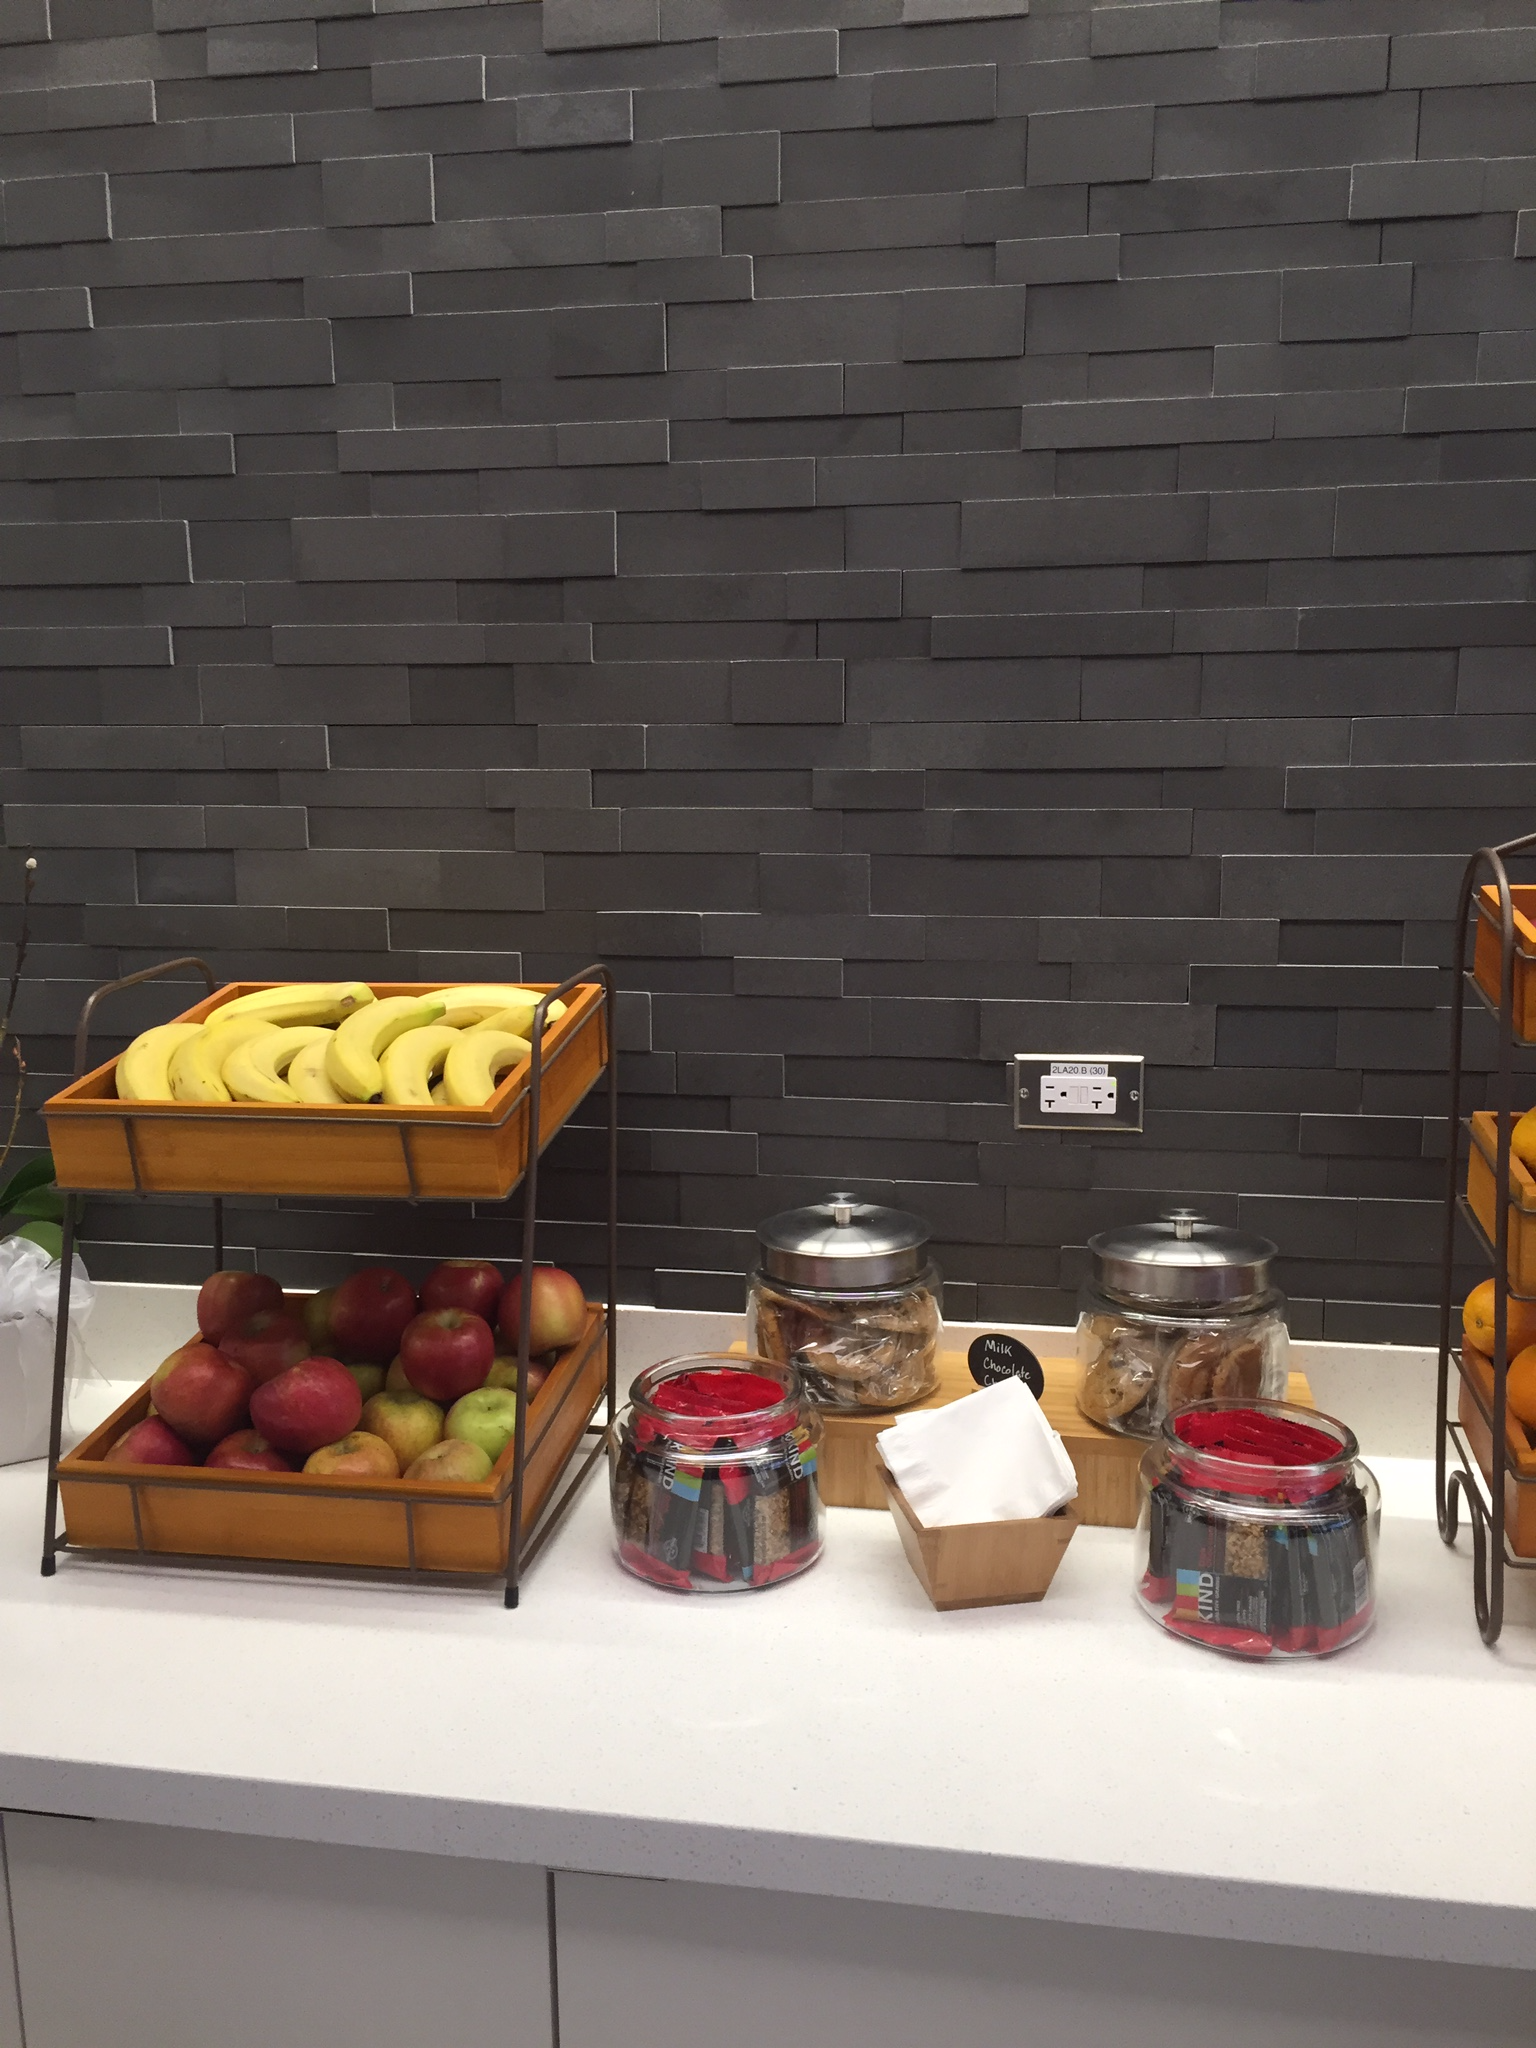 Delta ONE Lounge at LAX food display